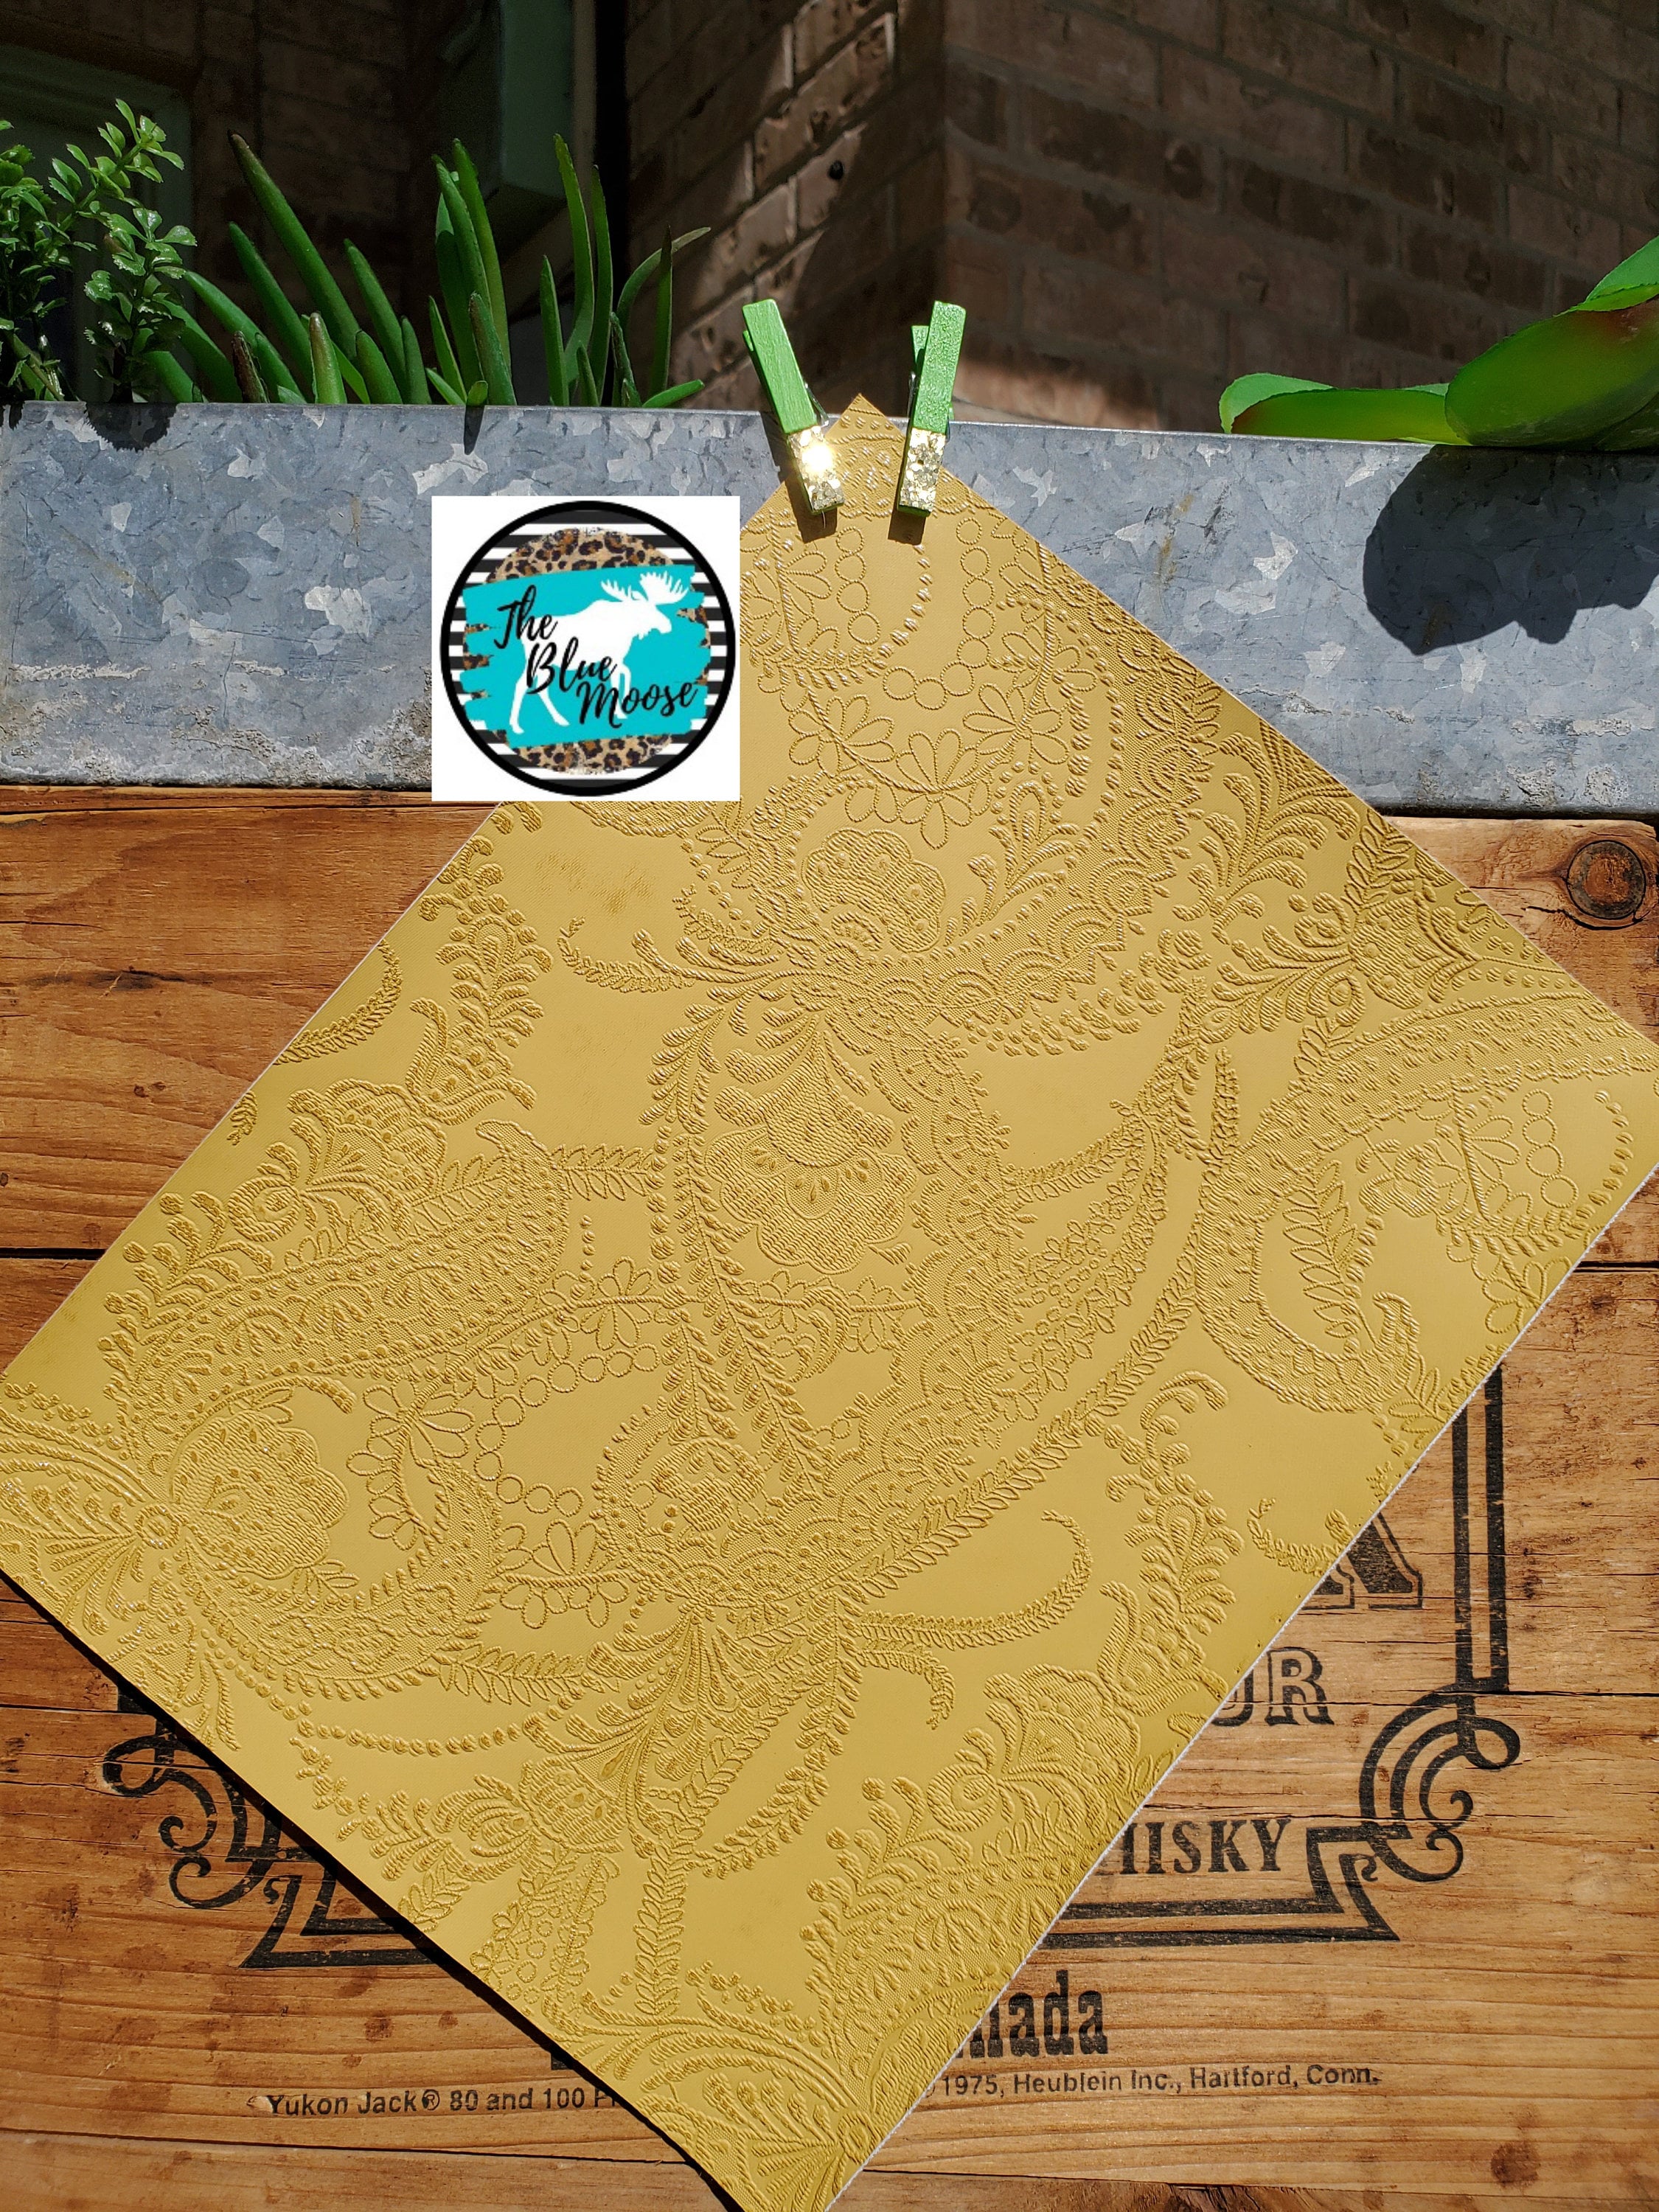 Yellow Alligator Faux Leather Sheets, Solid Embossed Textured Vinyl Fabric,  Diy Hair Bow and Earrings Supplies 